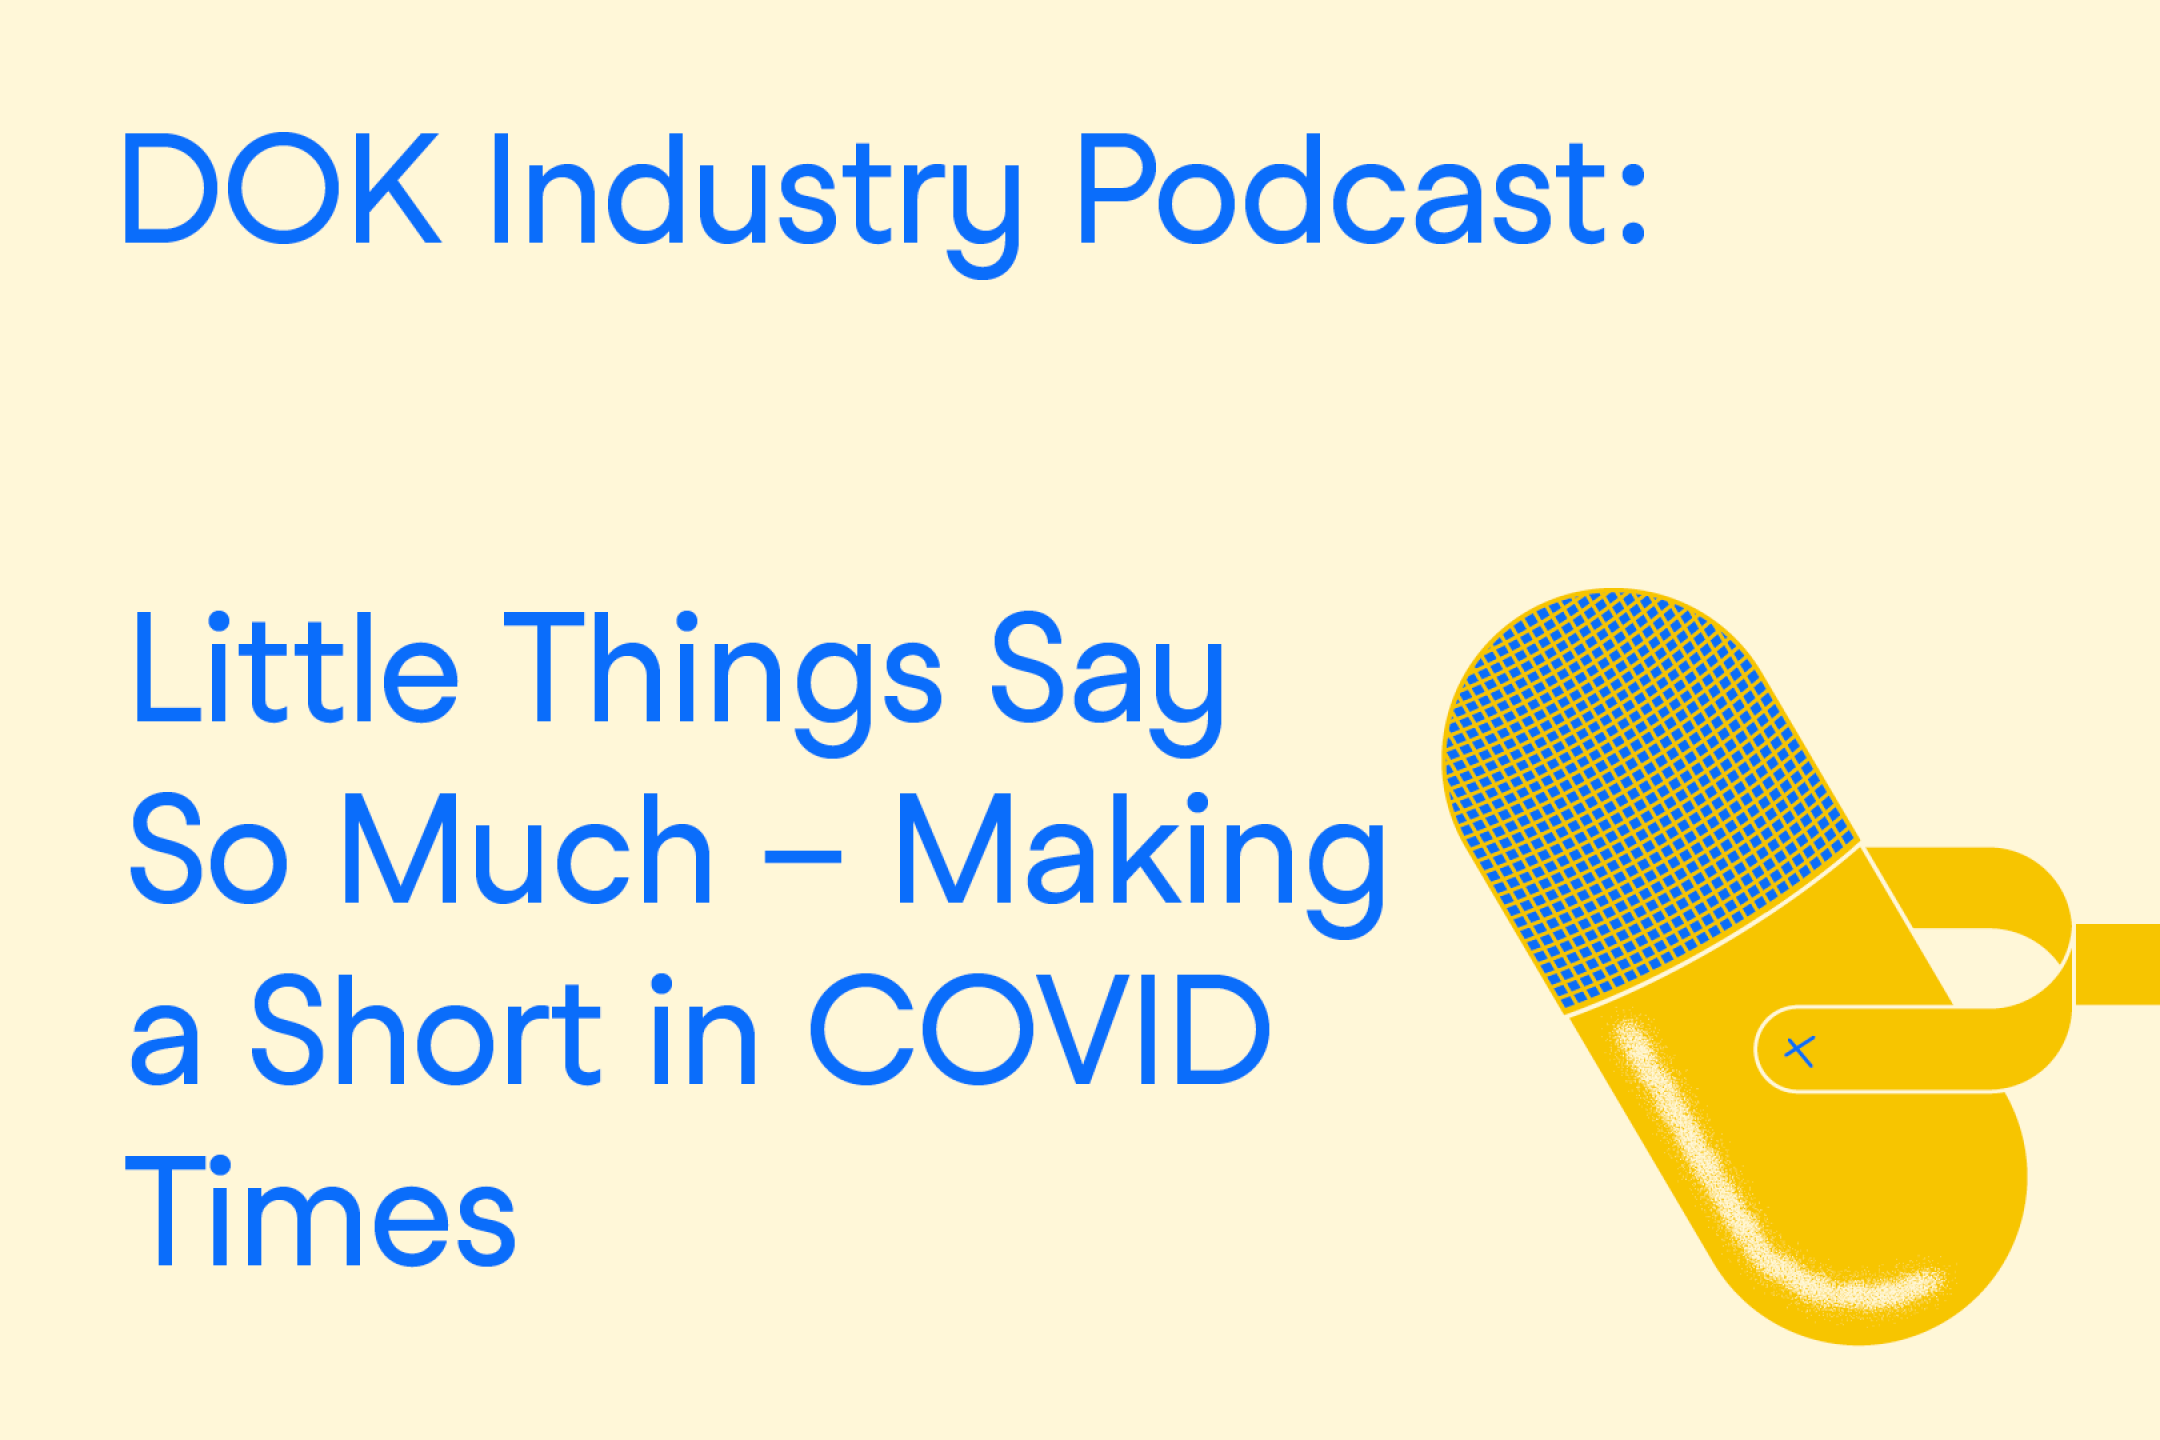 A text graphic with blue letters on a yellow background. At the right the illustration of a microphone. At the left the text: “DOK Industry Podcast: Little Things Say So Much – Making a Short in COVID Times”